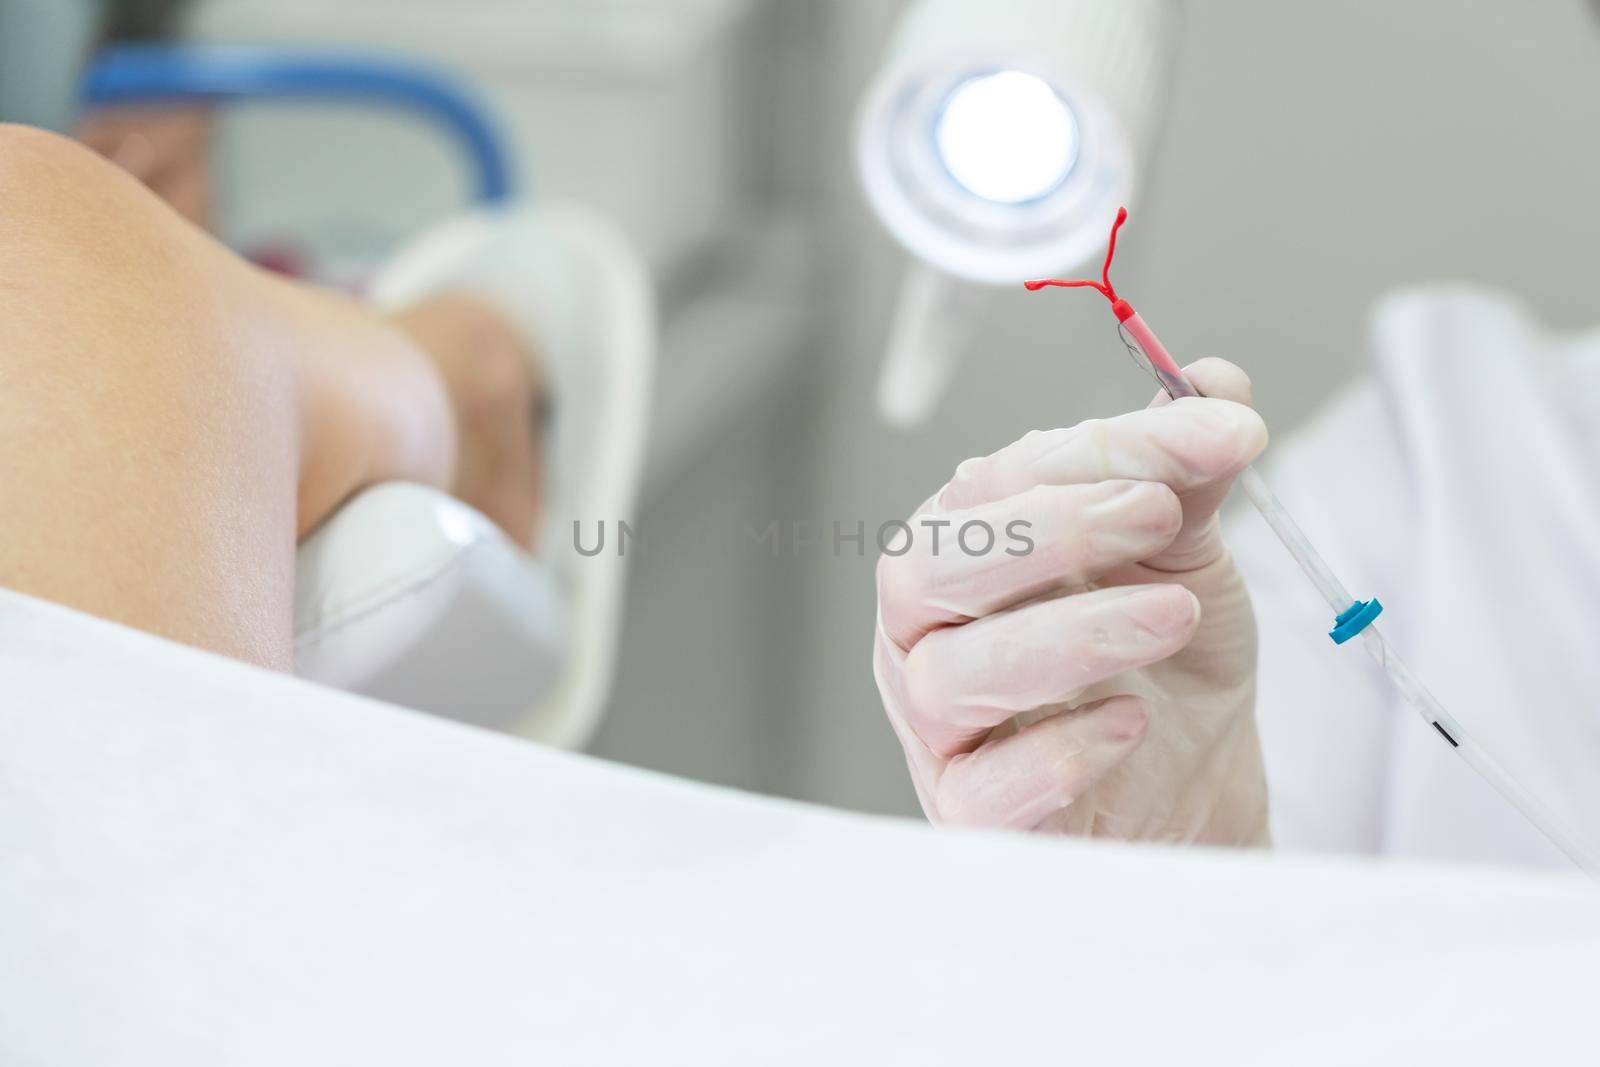 Gynecologist holding an IUD birth control device before using it for patient by Mariakray